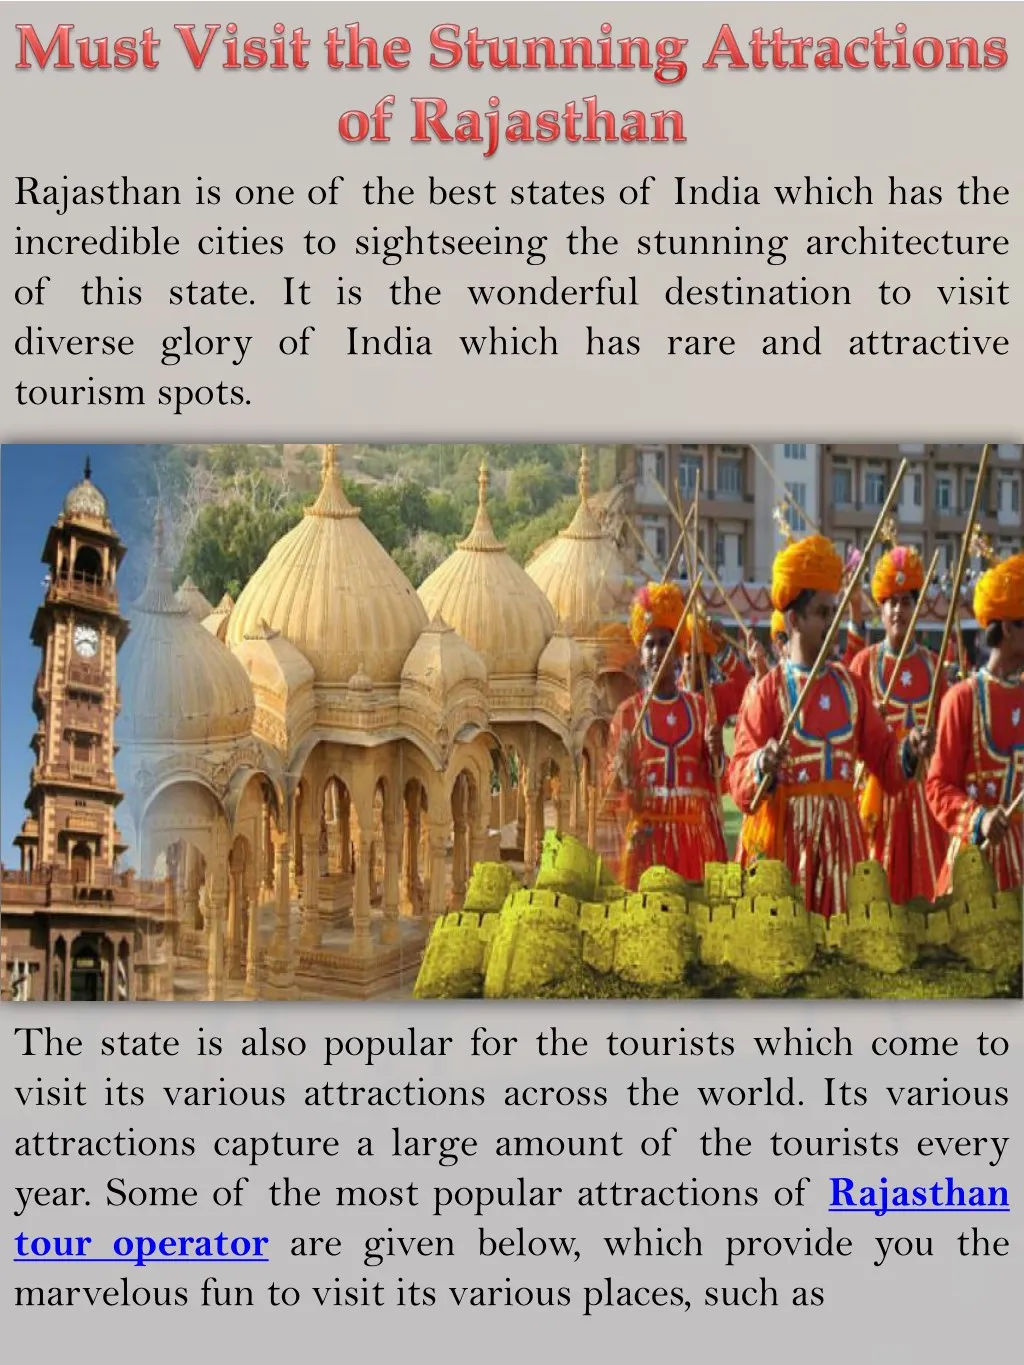 rajasthan is one of the best states of india